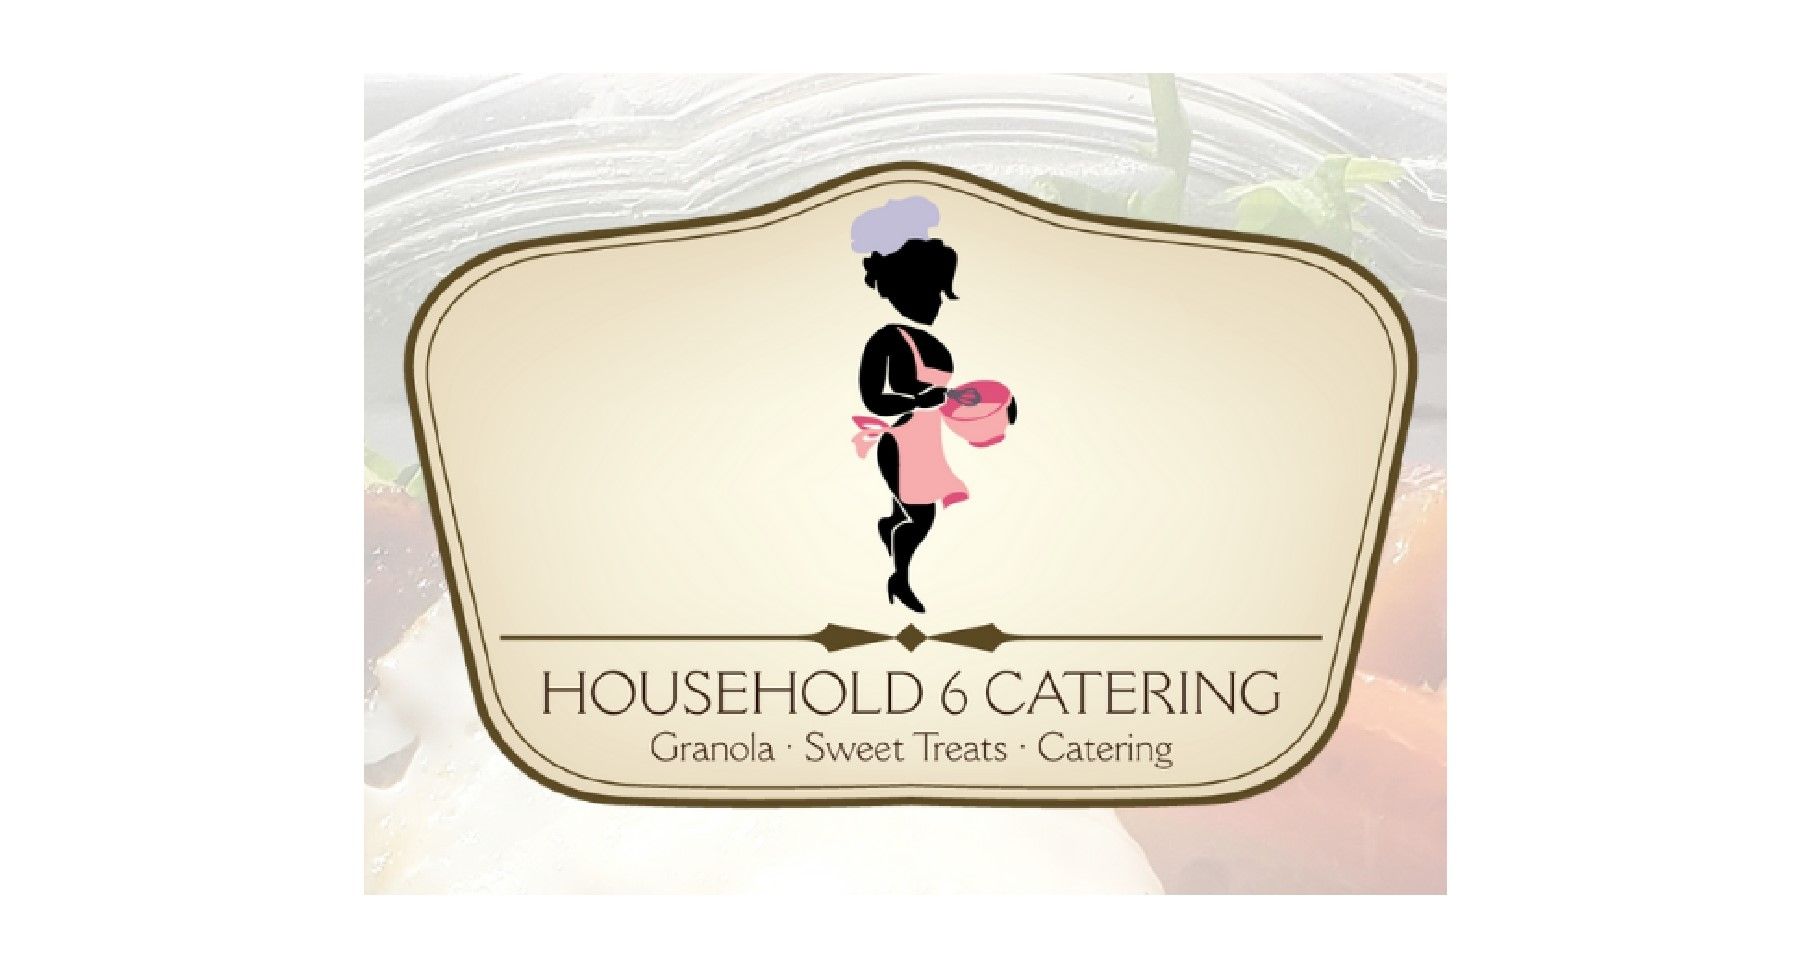 Fresh, Wholesome, and Delicious - Household 6 Catering